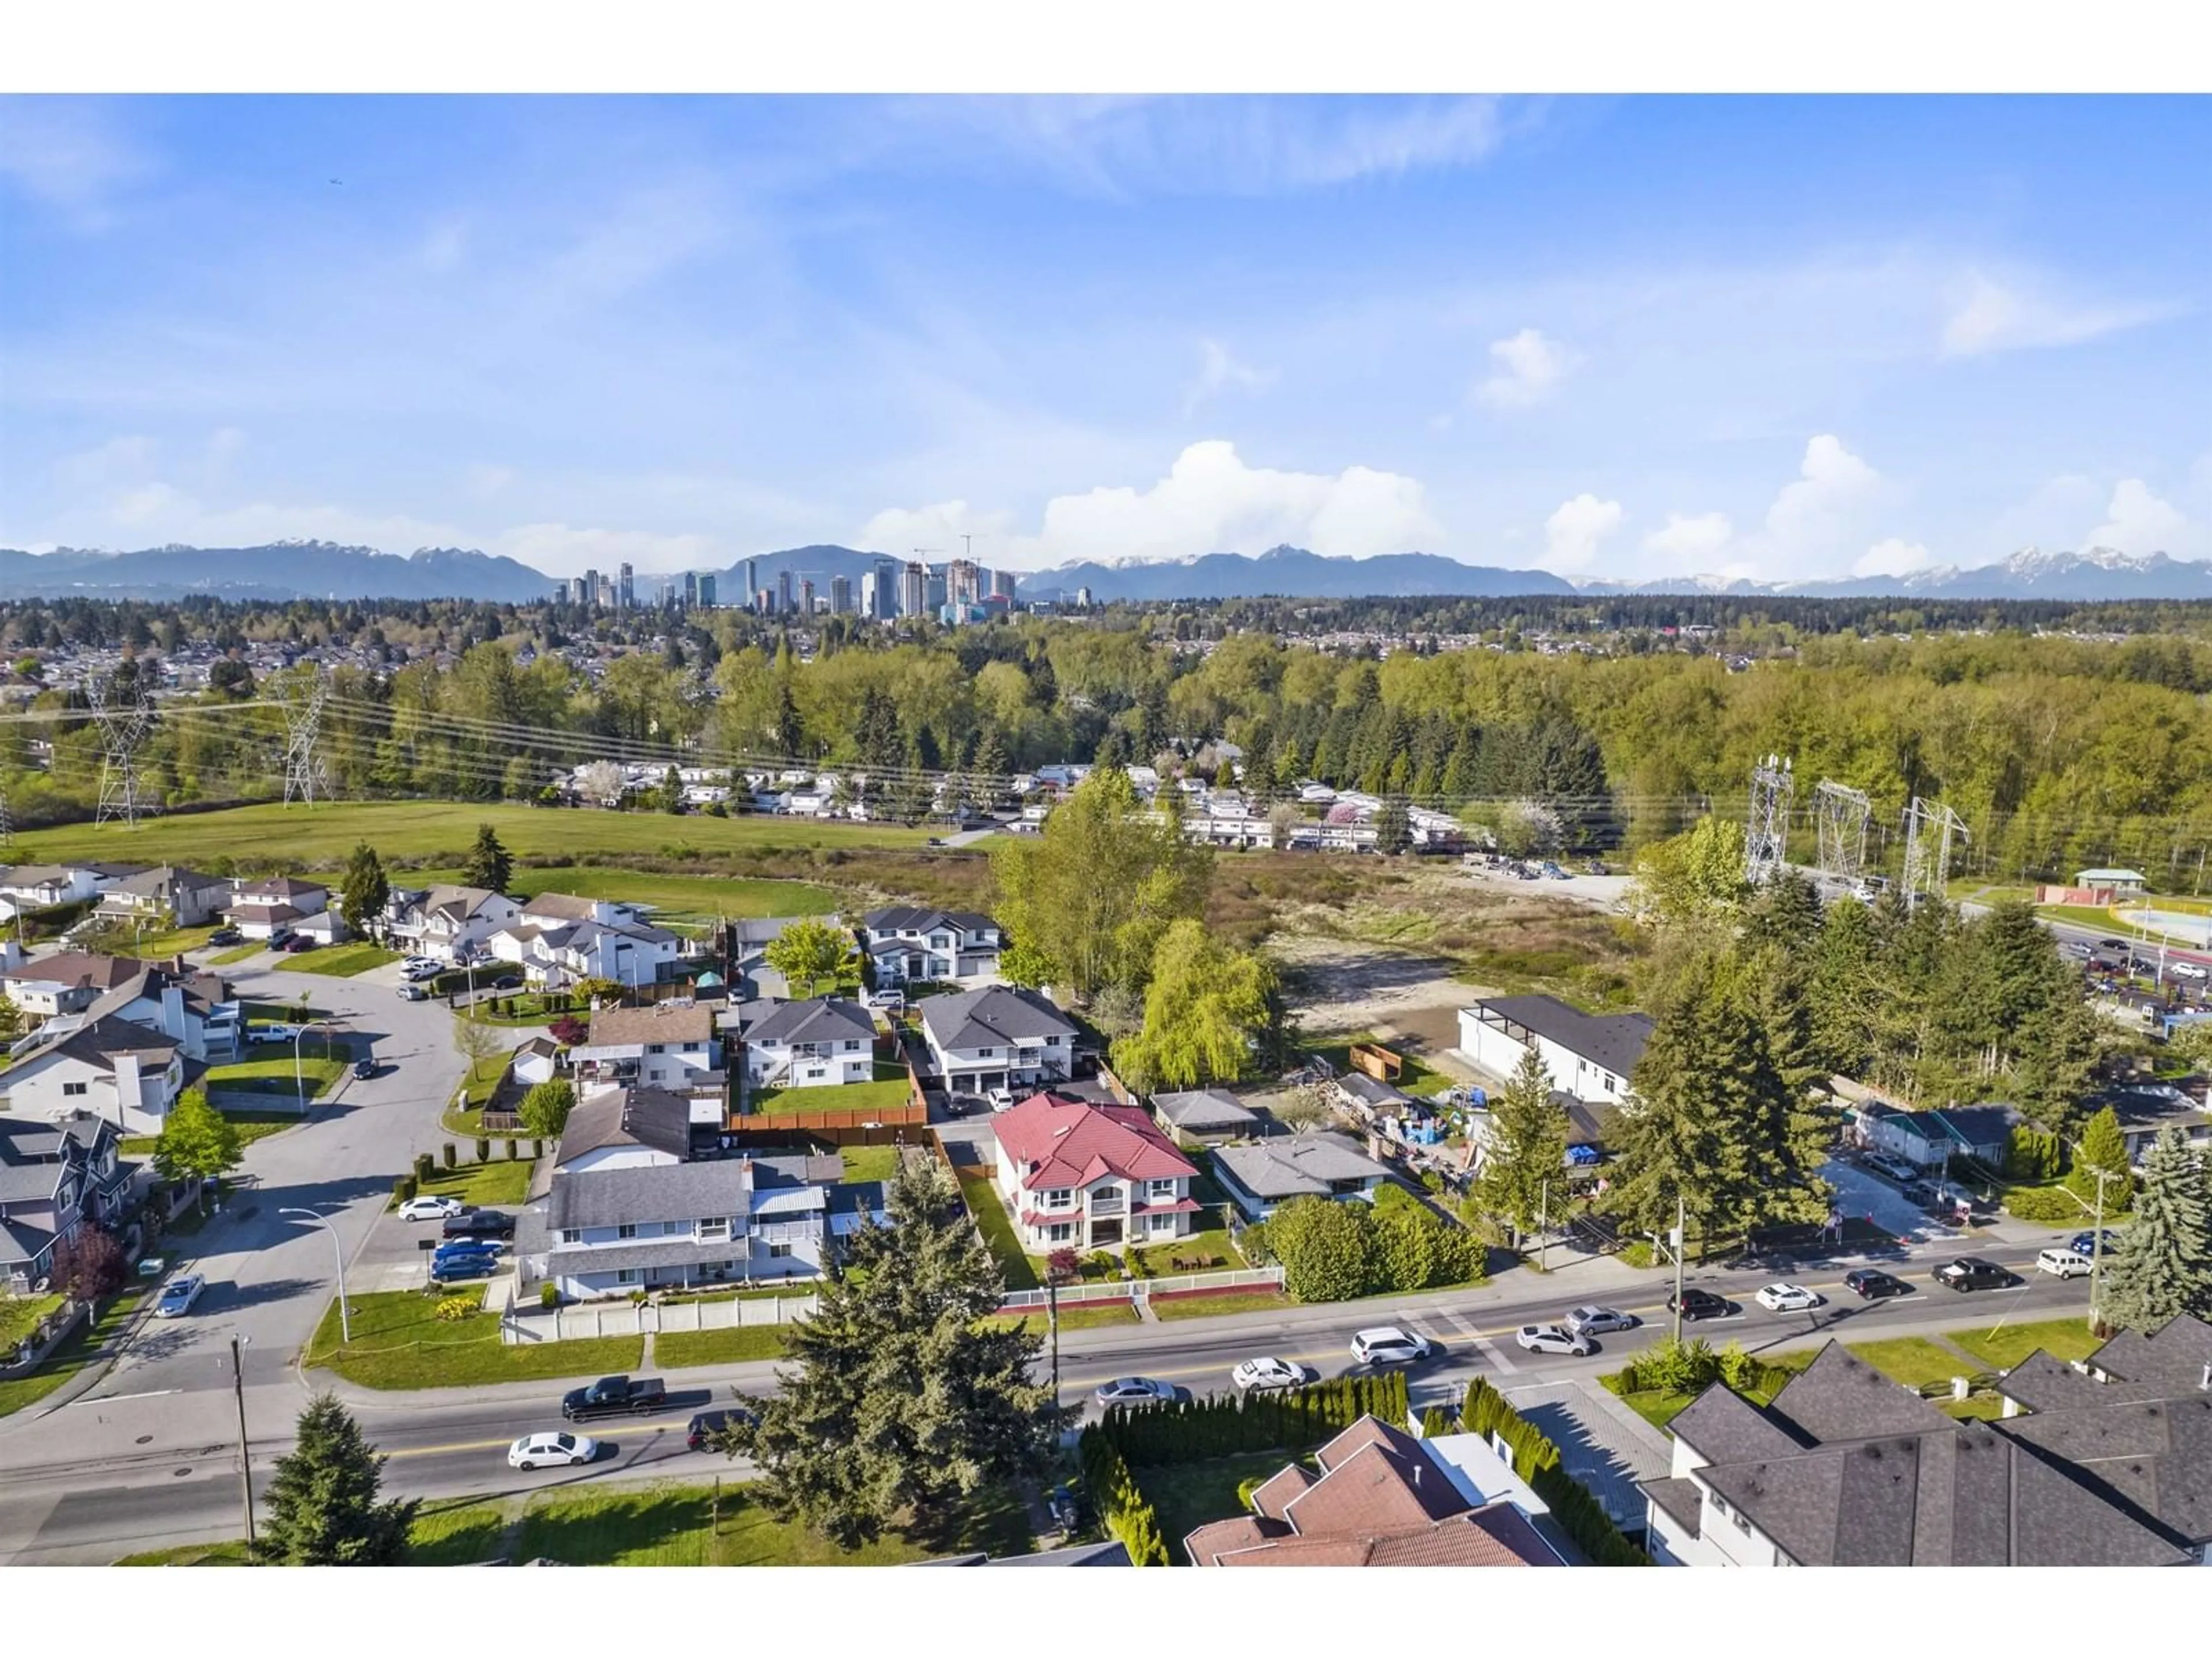 Lakeview for 13505 84 AVENUE, Surrey British Columbia V3W3H3